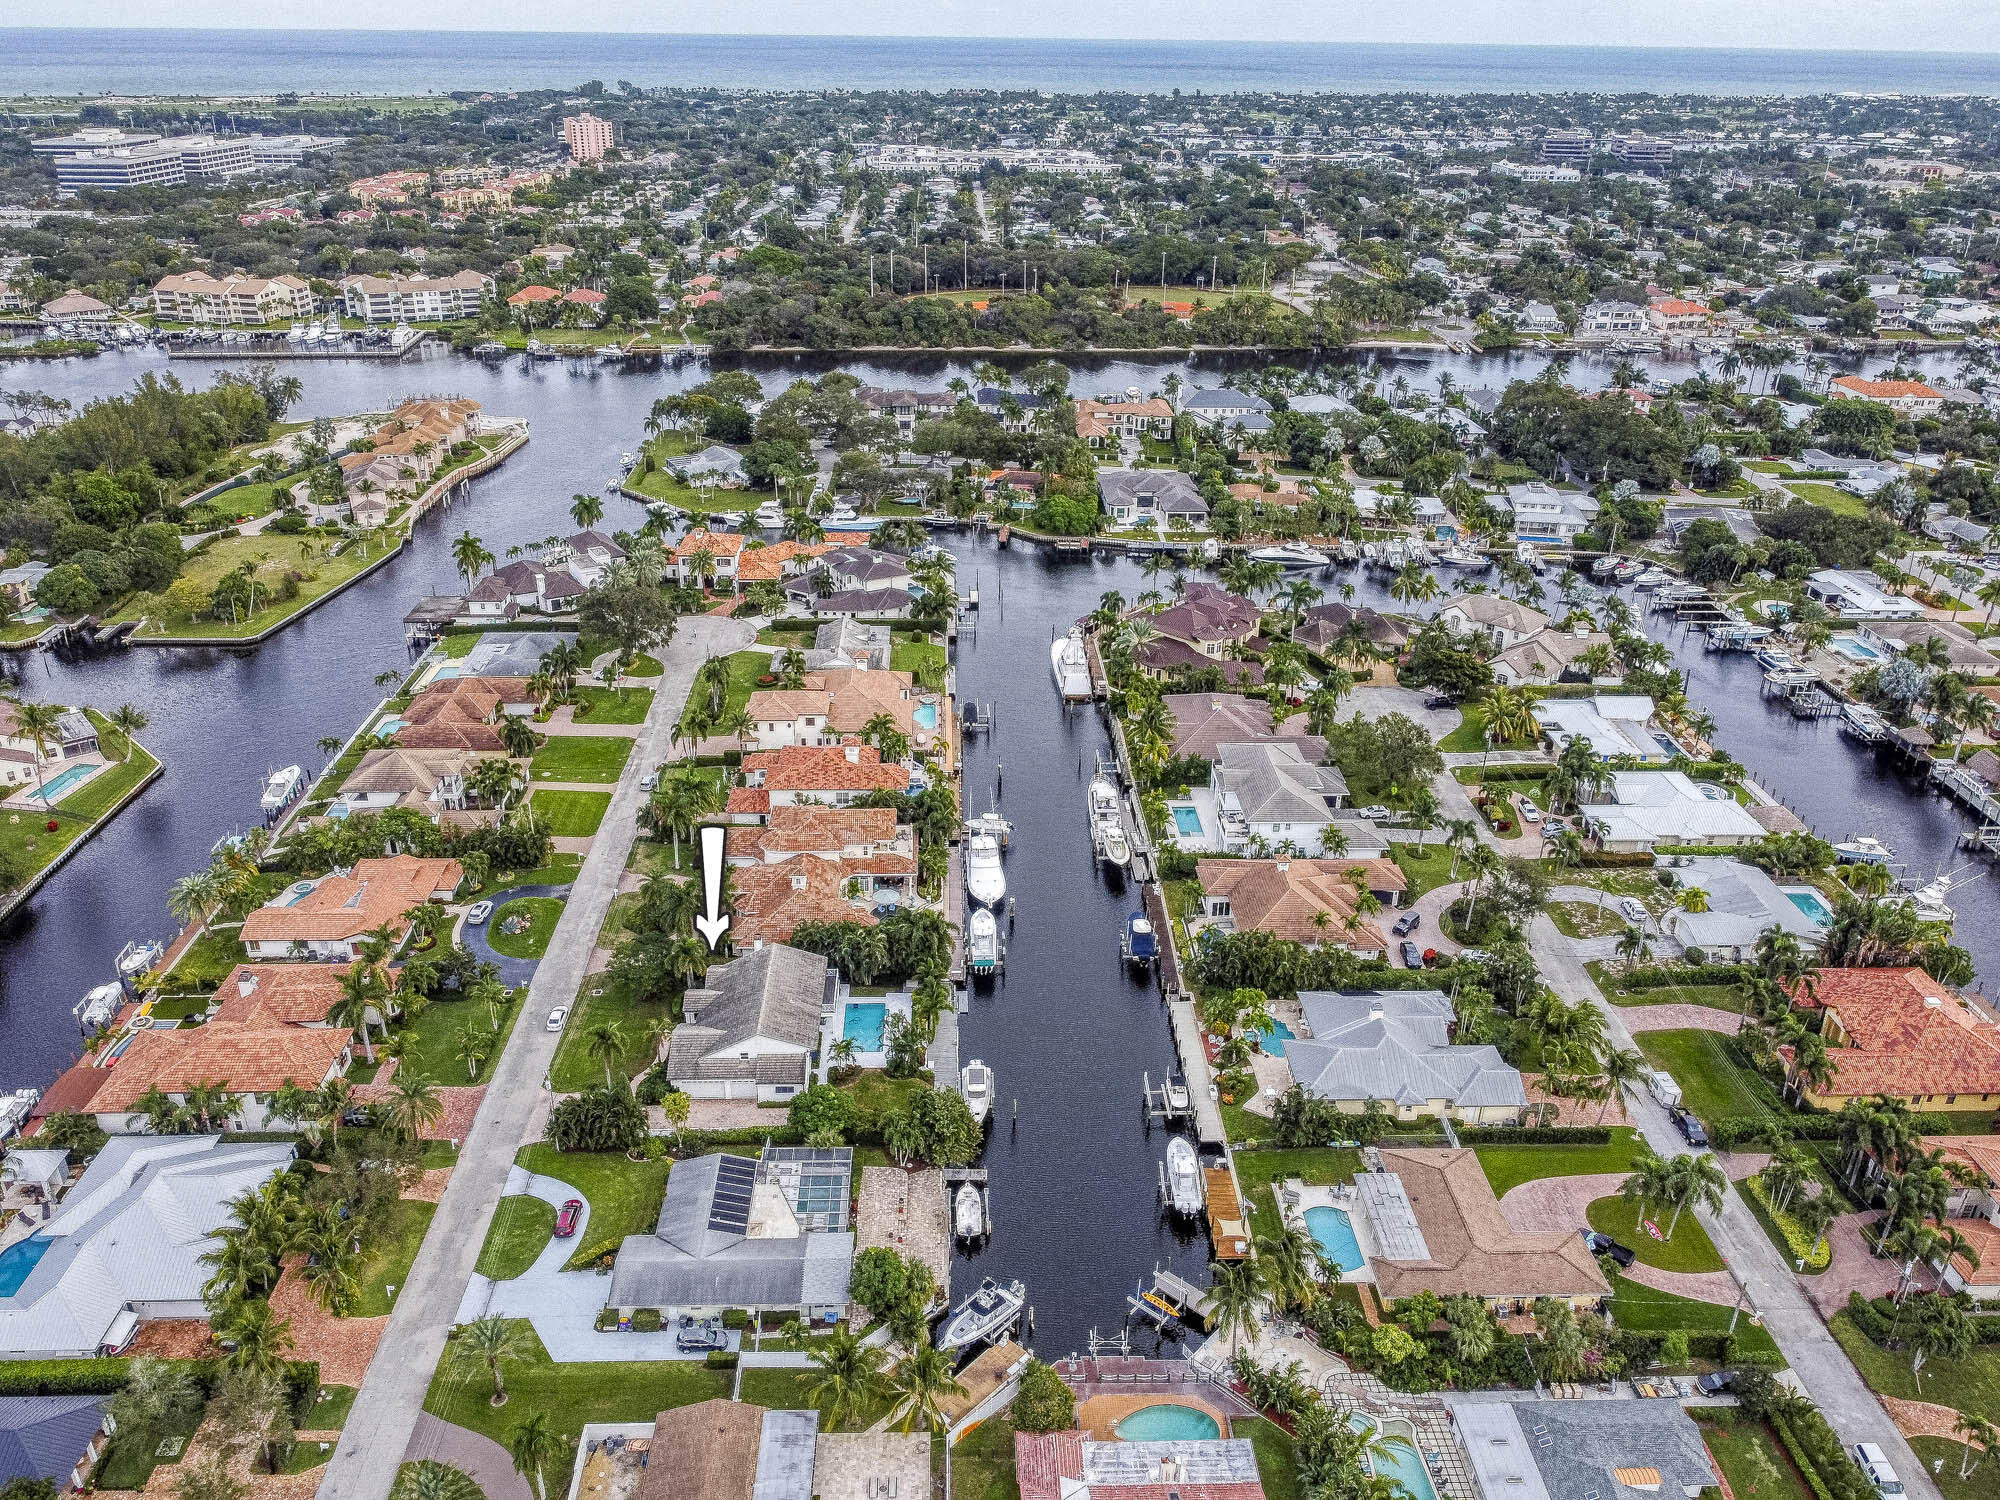 Priced to sell with motivated sellers. This home/land features approximately 75ft of waterfront with no fixed bridges to the Intracoastal on arguably the most desirable waterfront street in Palm Beach Gardens. Desirable south exposure. 10,000lb boat lift. Maheu Estates is located off Prosperity Farms road and is minutes away from shopping, restaurants, the beach, and Palm Beach International Airport.